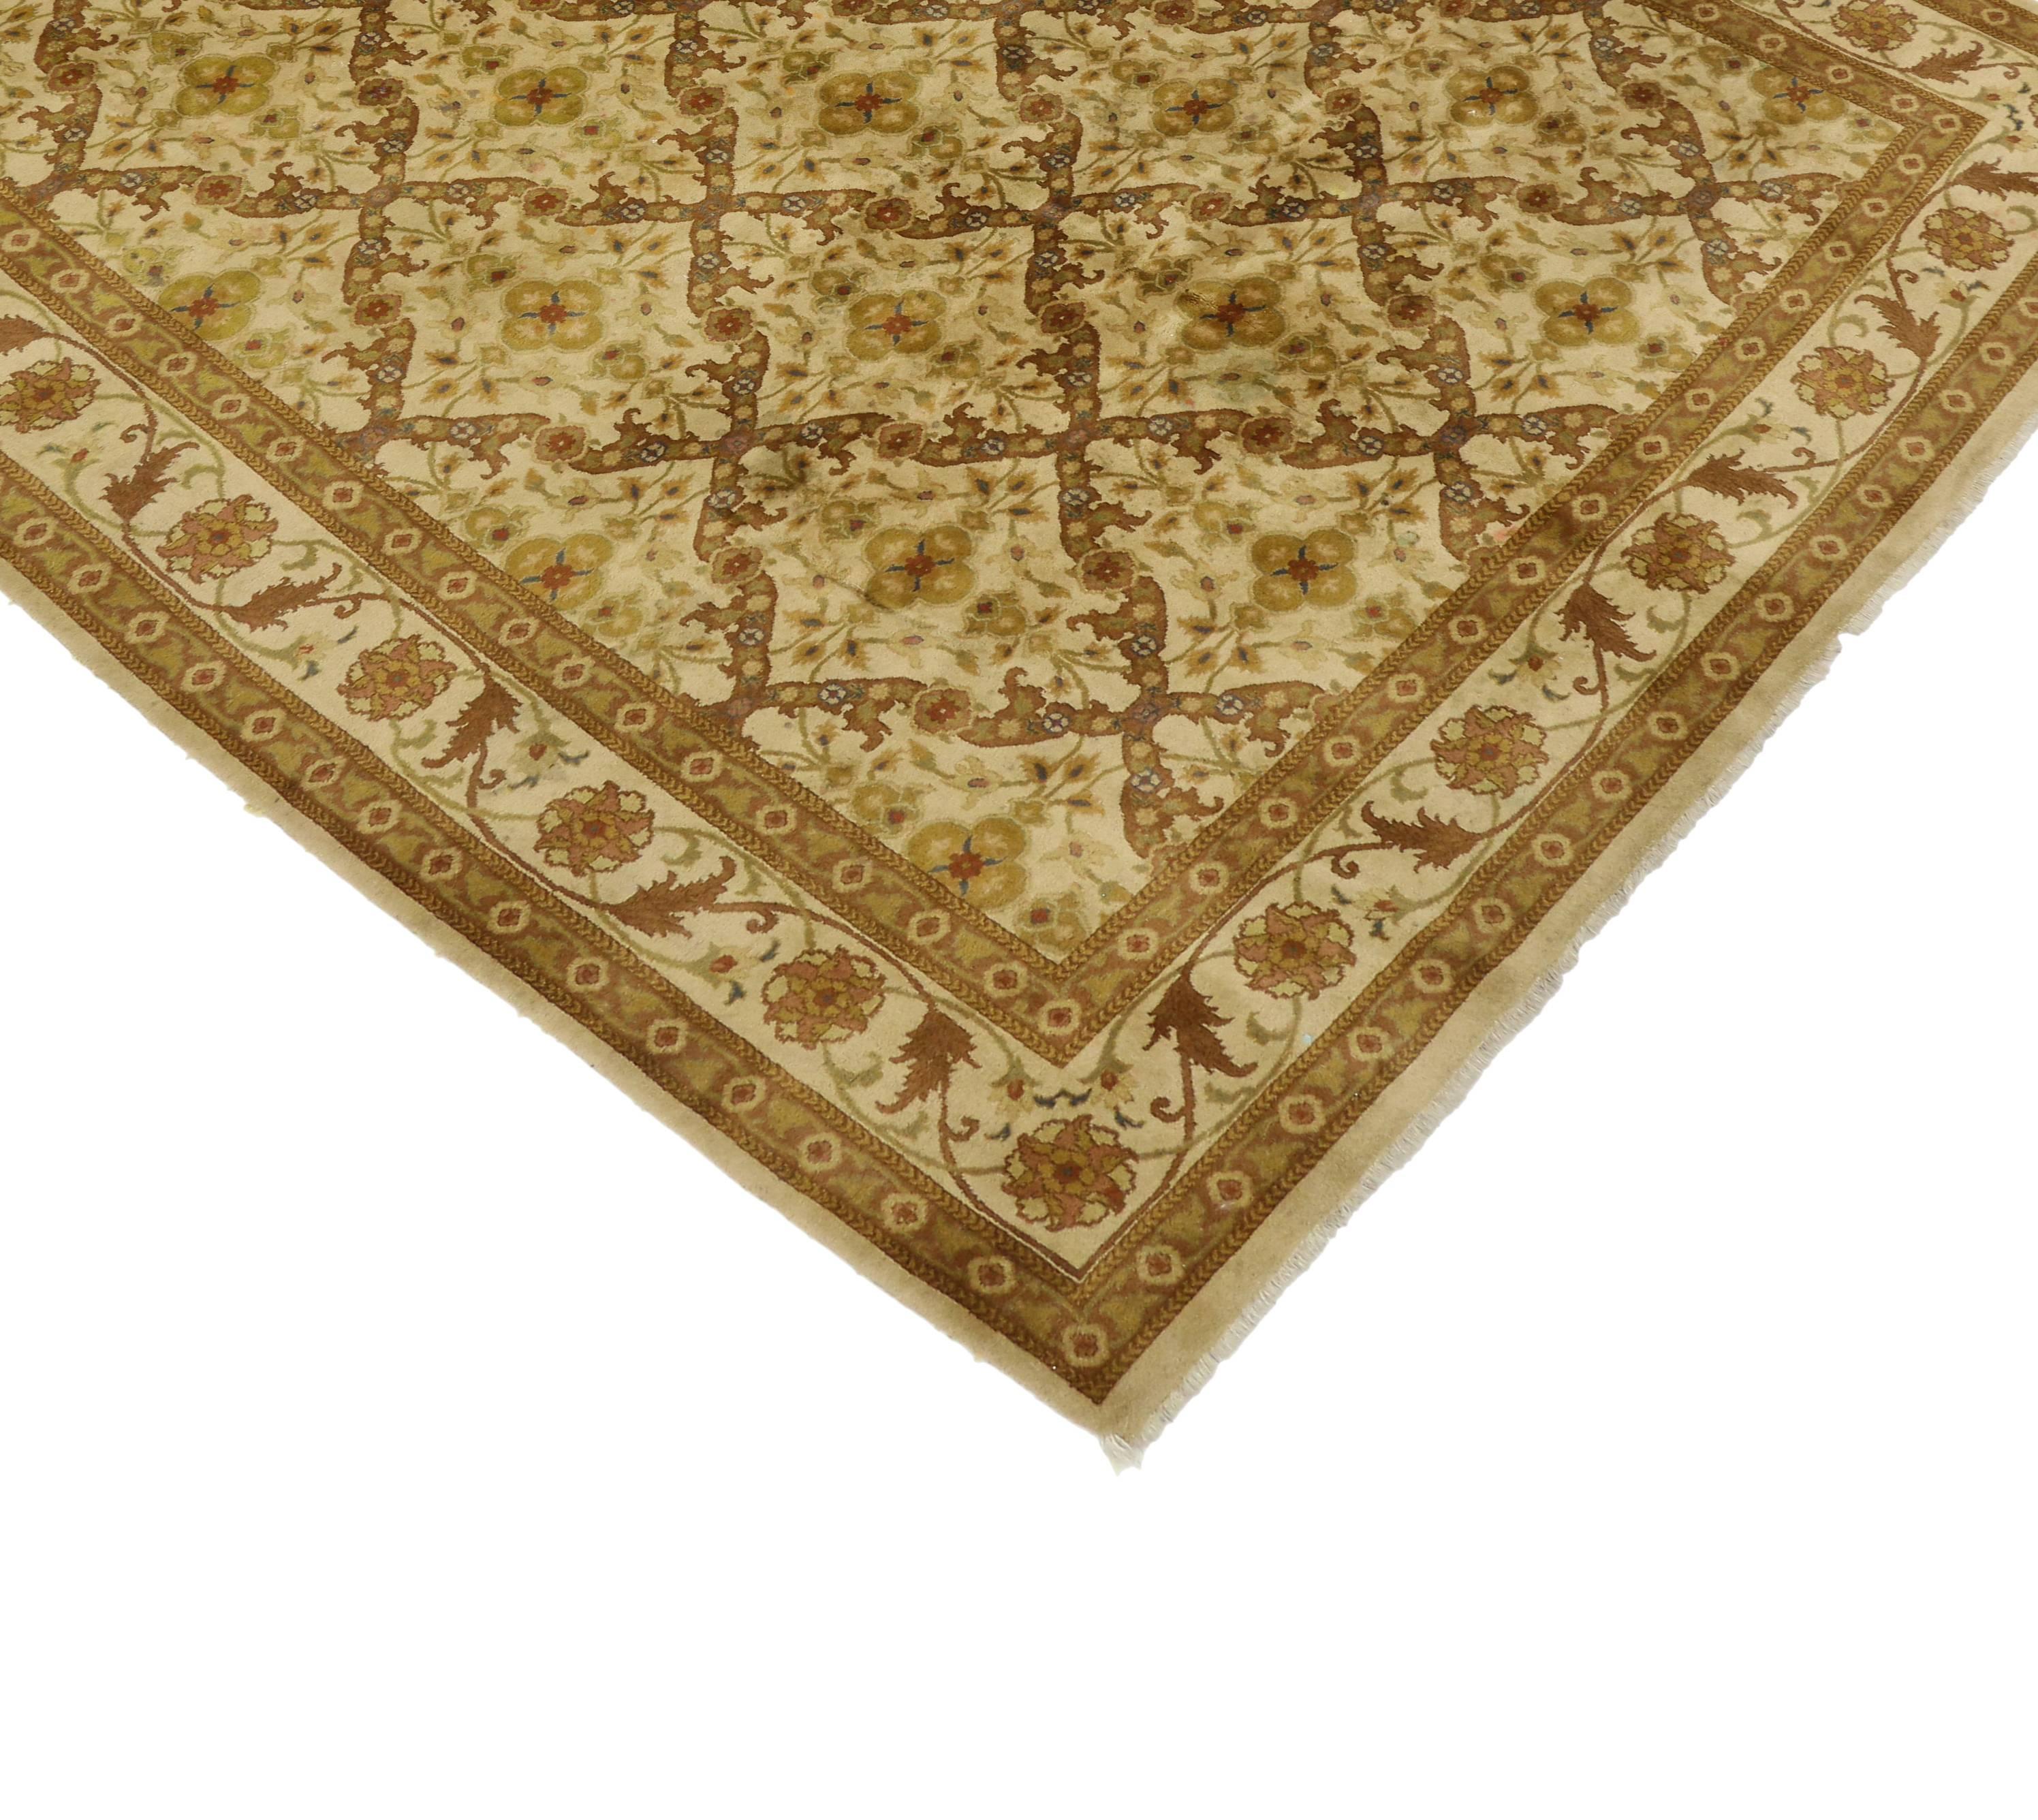 76900 Vintage Indian Rug with Transitional Style and Golden Hues and Modern Style. Balance golden hues and an elegantly cusped lozenge pattern in this vintage Indian rug with transitional style. It blends traditional with modern and the end result